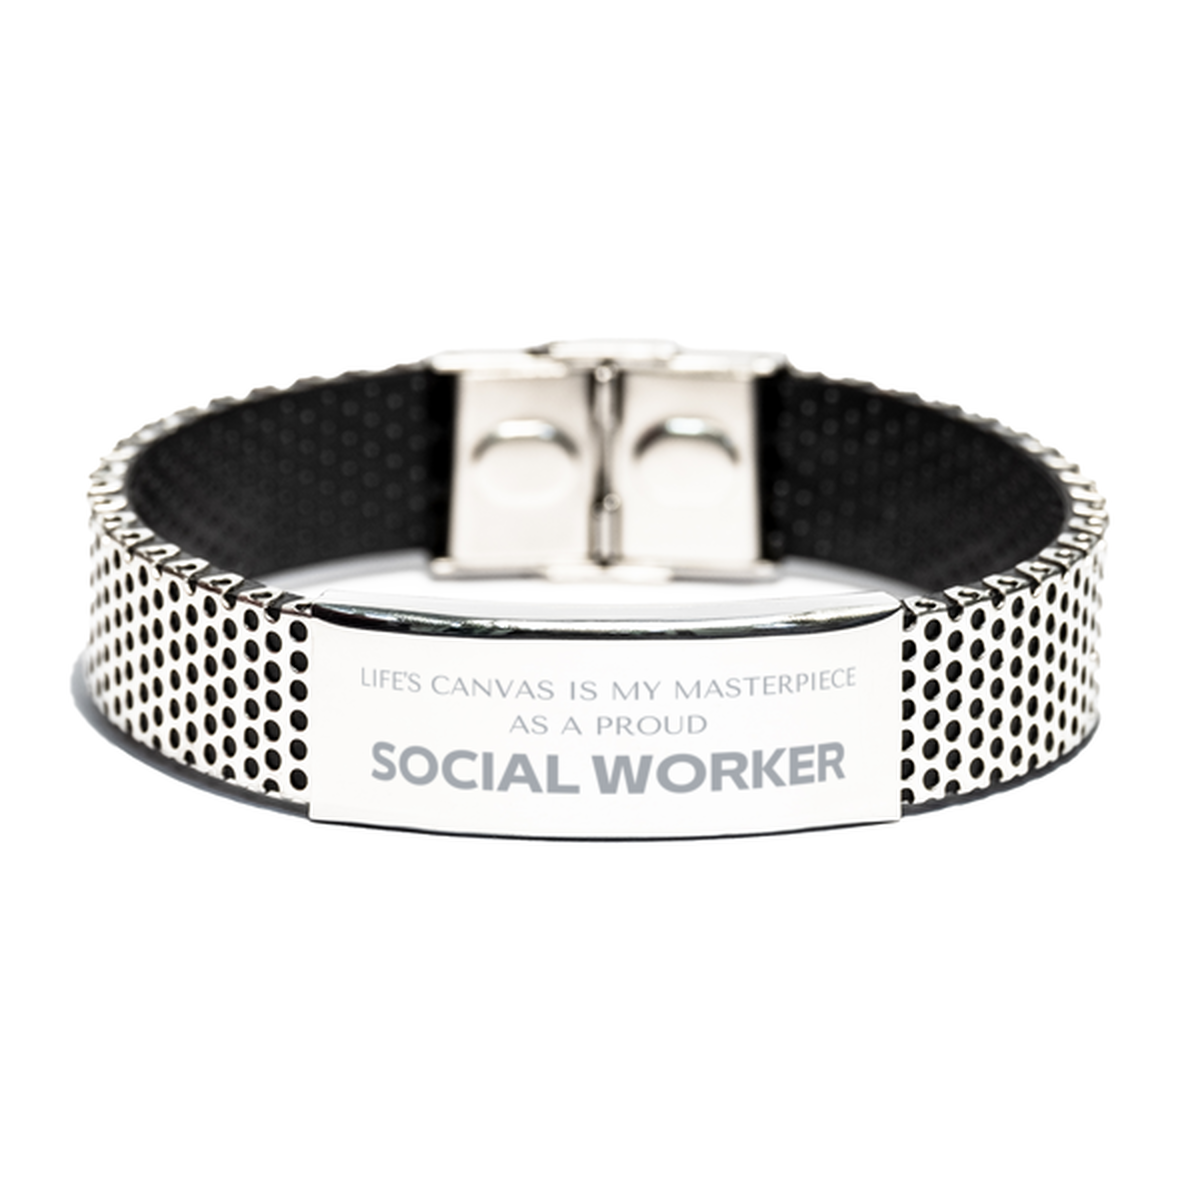 Proud Social Worker Gifts, Life's canvas is my masterpiece, Epic Birthday Christmas Unique Stainless Steel Bracelet For Social Worker, Coworkers, Men, Women, Friends